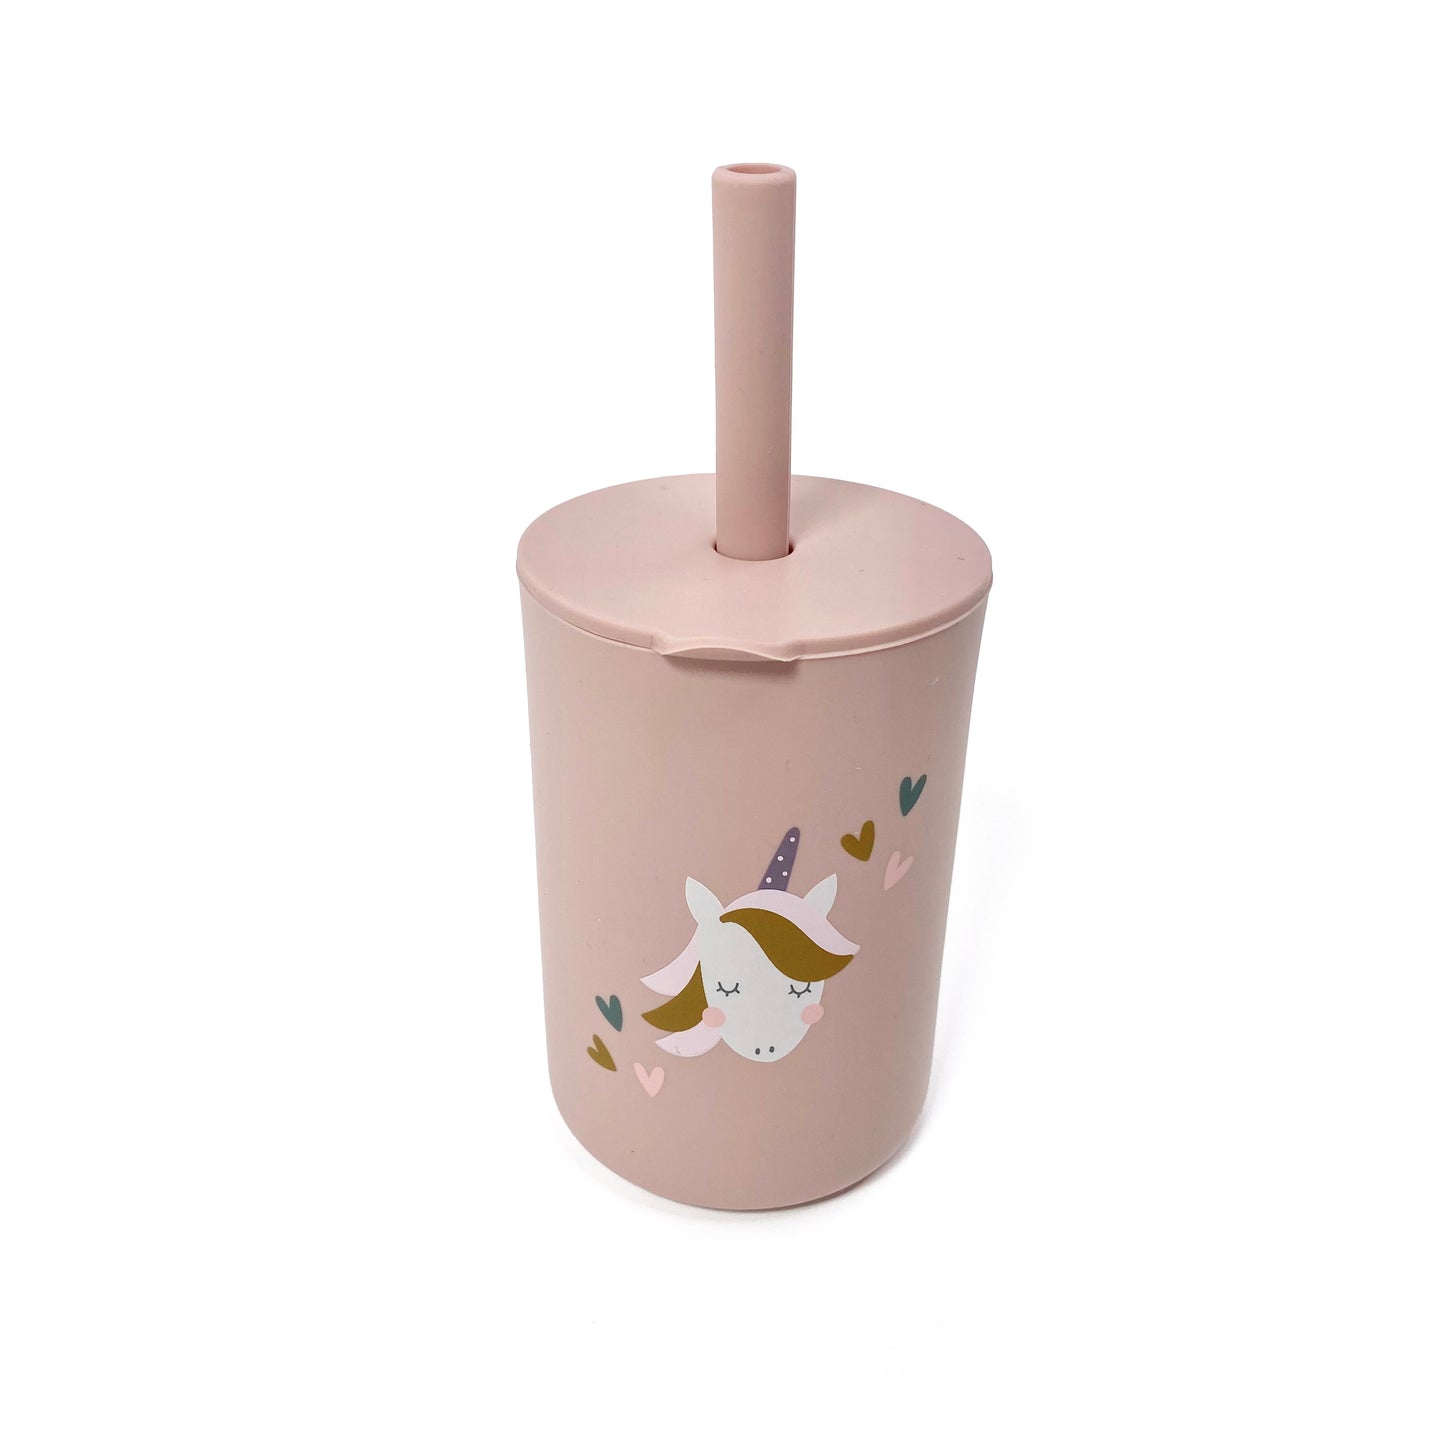 A children’s pink silicone drinking cup, with matching lid and straw, featuring a unicorn design. The image shows the cup with lid and straw attached.